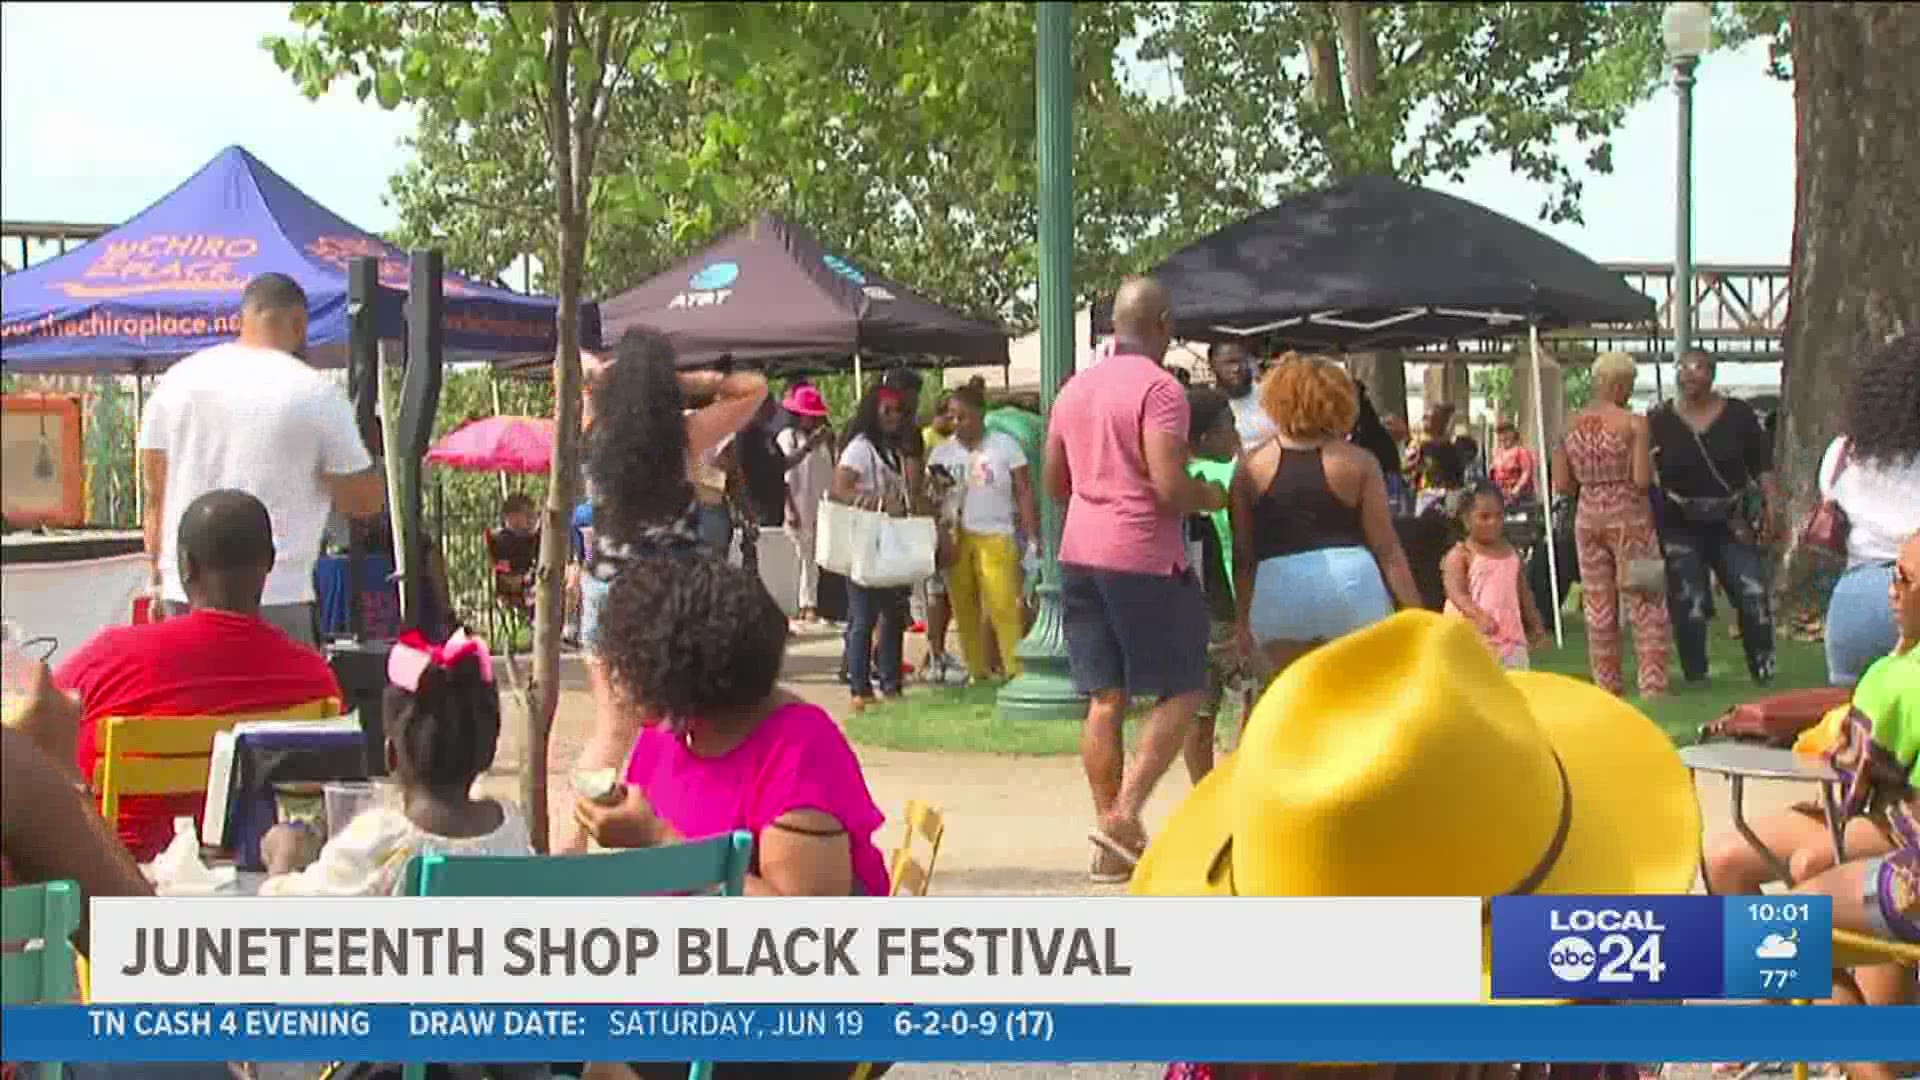 The Juneteenth Shop Black Festival was virtual last year. This year, the event was a full-day celebration downtown featuring more than 50 black owned businesses.